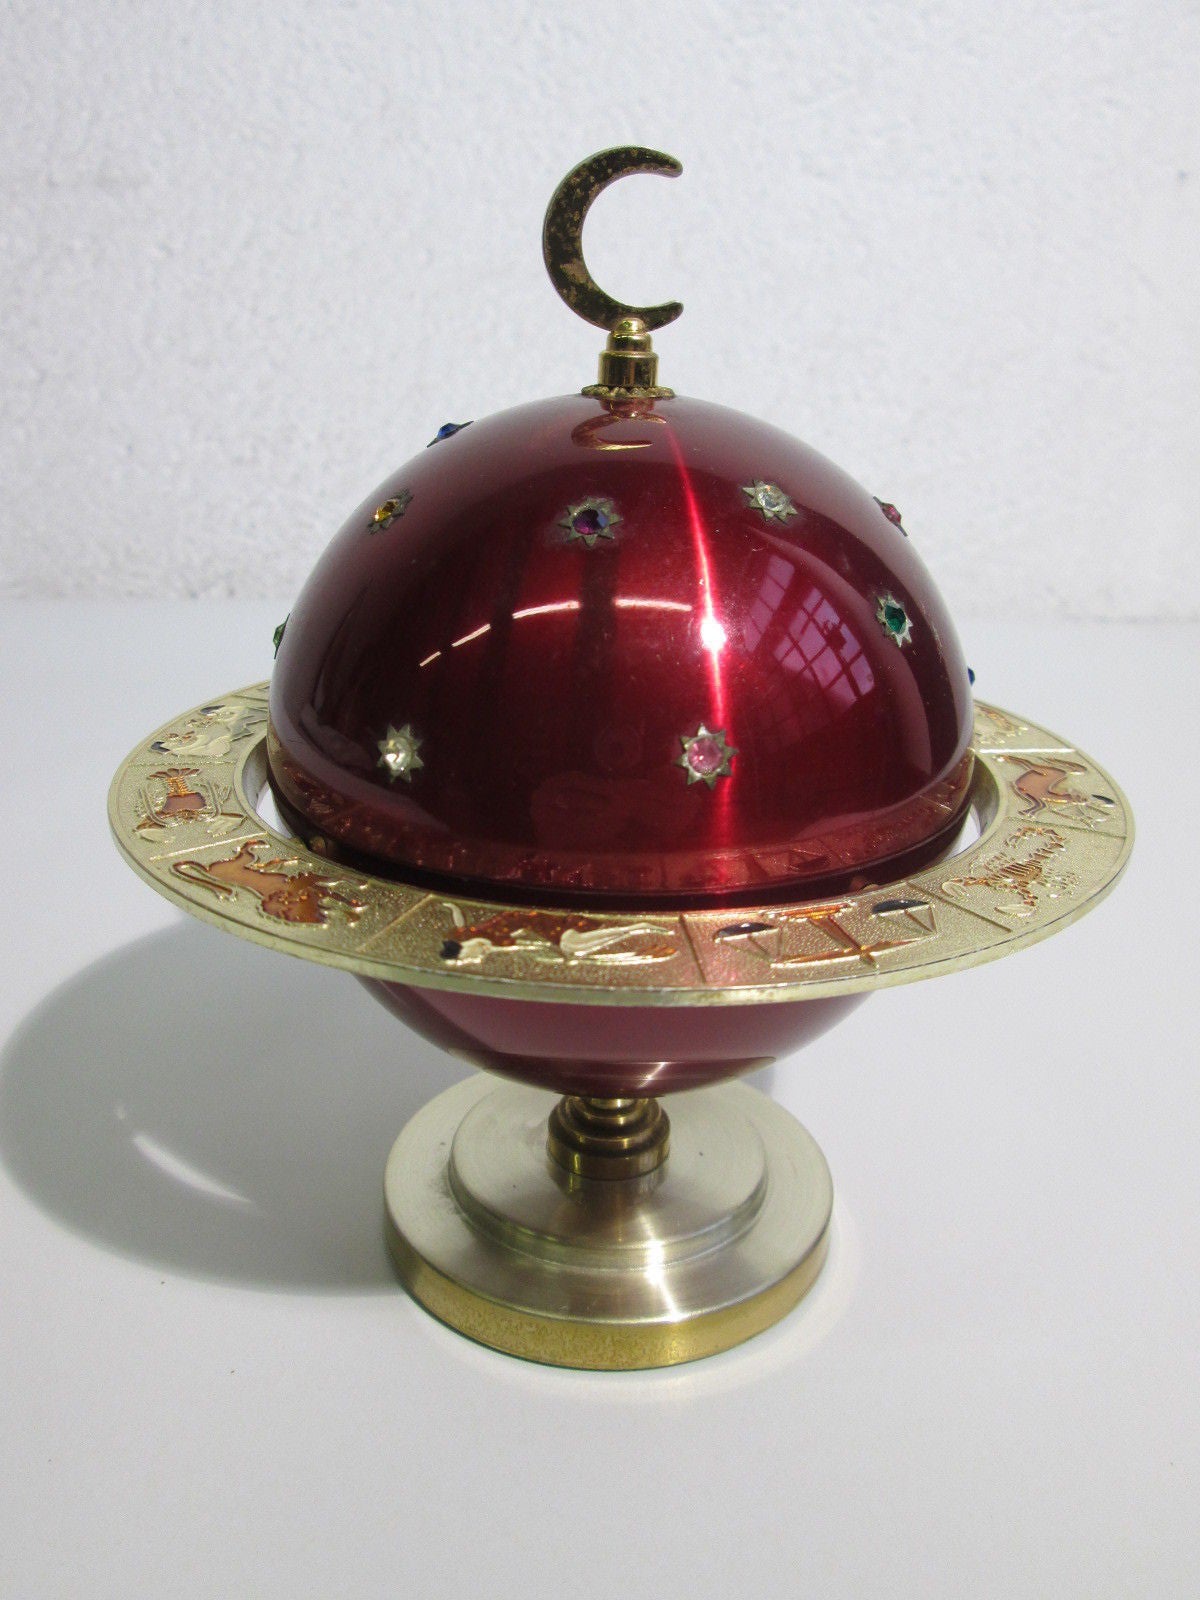 Vintage Italian cigarette holder in form a planet or globe which is red anodized aluminum and encrusted with jewels and surrounded by a Saturn-like ring decorated with Zodiacal figures, topped with a crescent moon finial. The top half of the globe